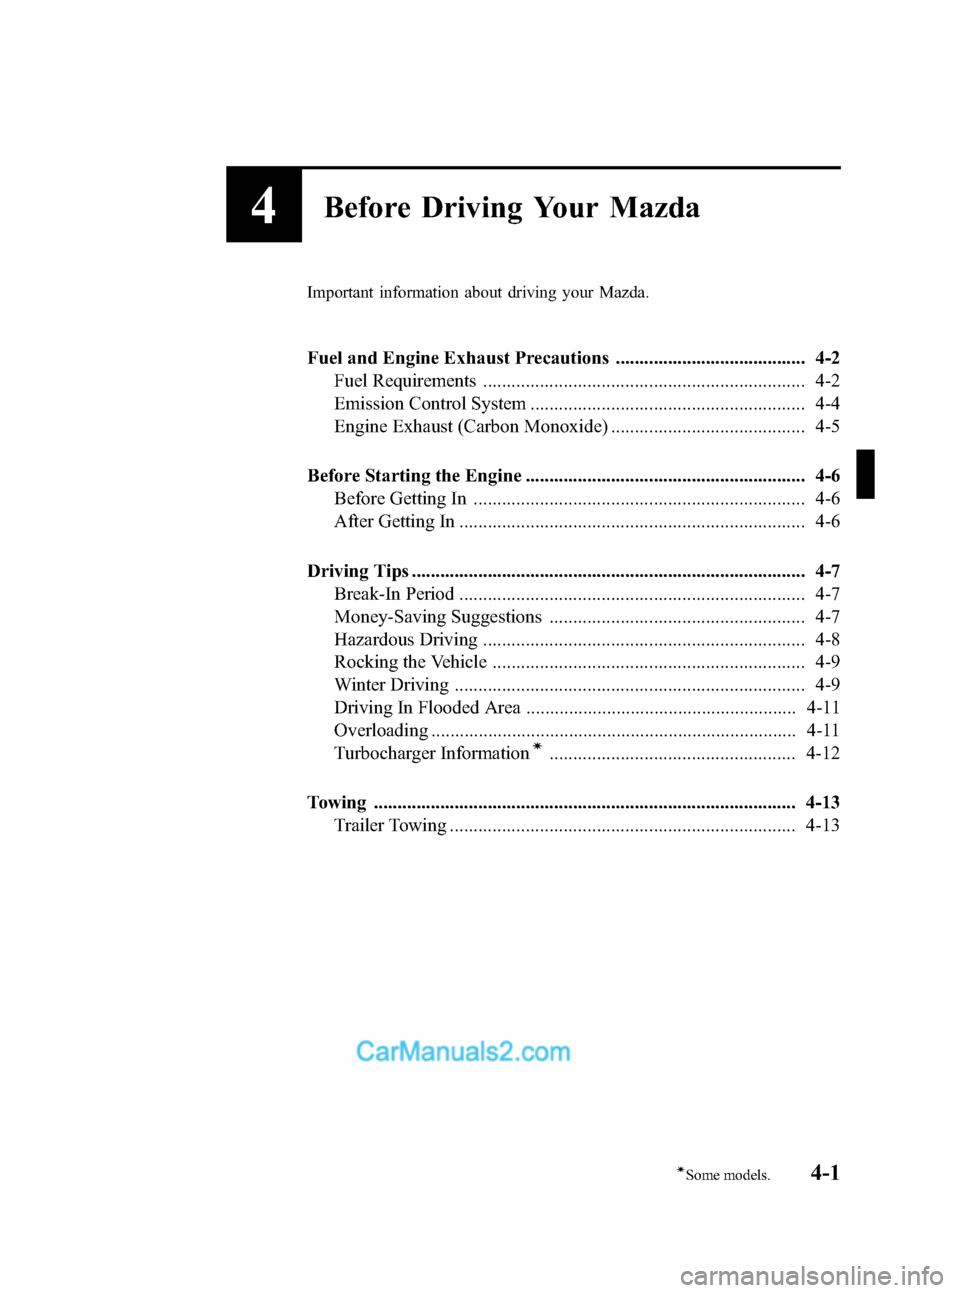 MAZDA MODEL MAZDASPEED 3 2008  Owners Manual (in English) Black plate (105,1)
4Before Driving Your Mazda
Important information about driving your Mazda.
Fuel and Engine Exhaust Precautions ........................................ 4-2
Fuel Requirements ......